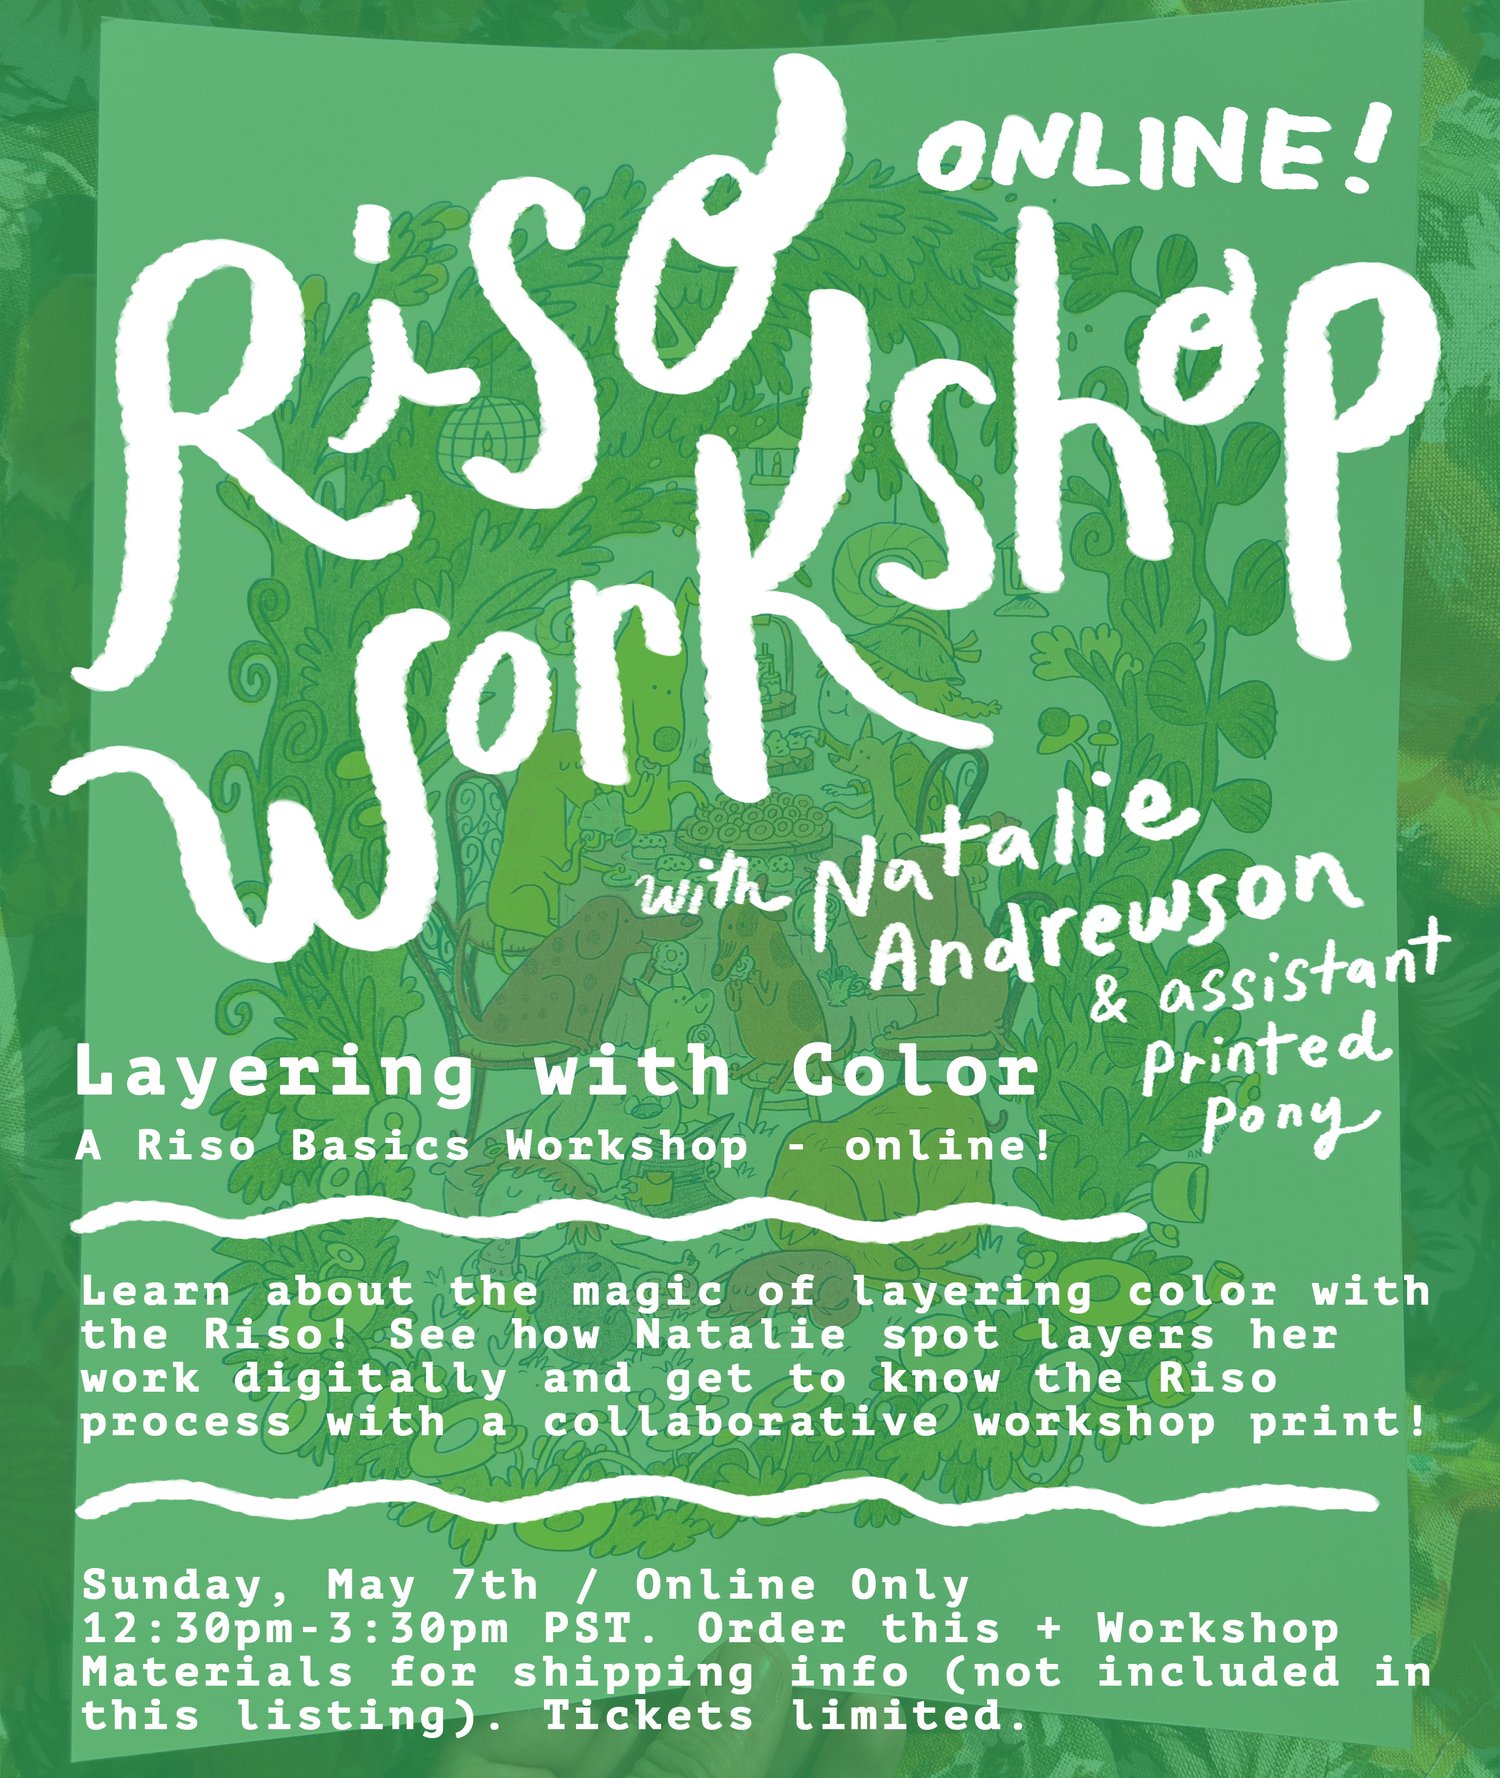 Online Riso Basics Workshop - Layering with Color